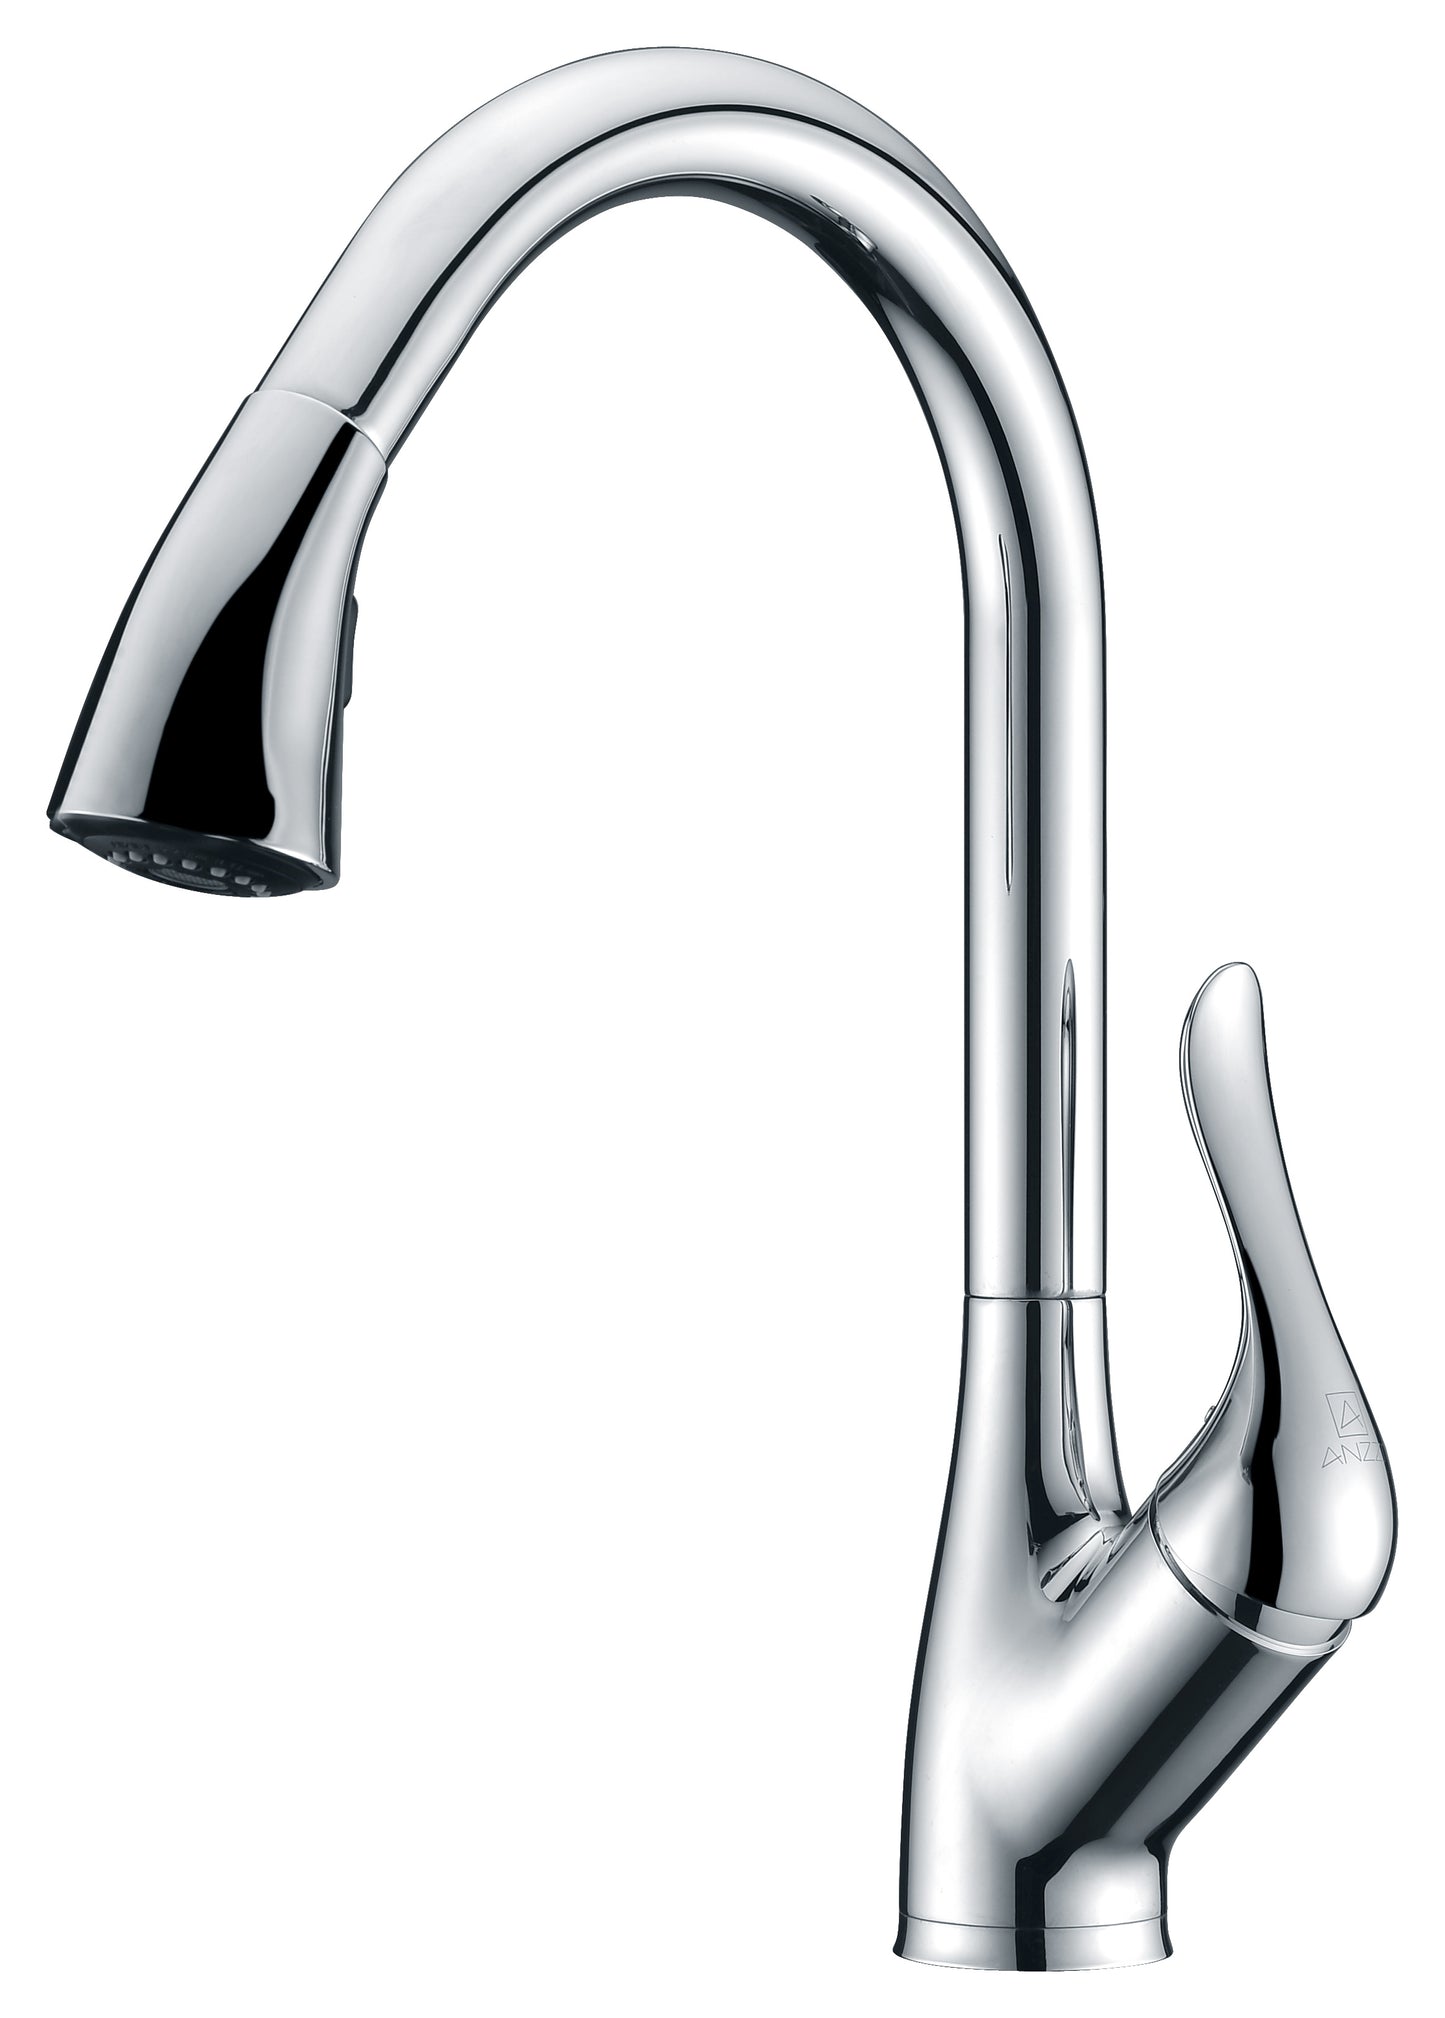 KF-AZ031 - Accent Series Single-Handle Pull-Down Sprayer Kitchen Faucet in Polished Chrome